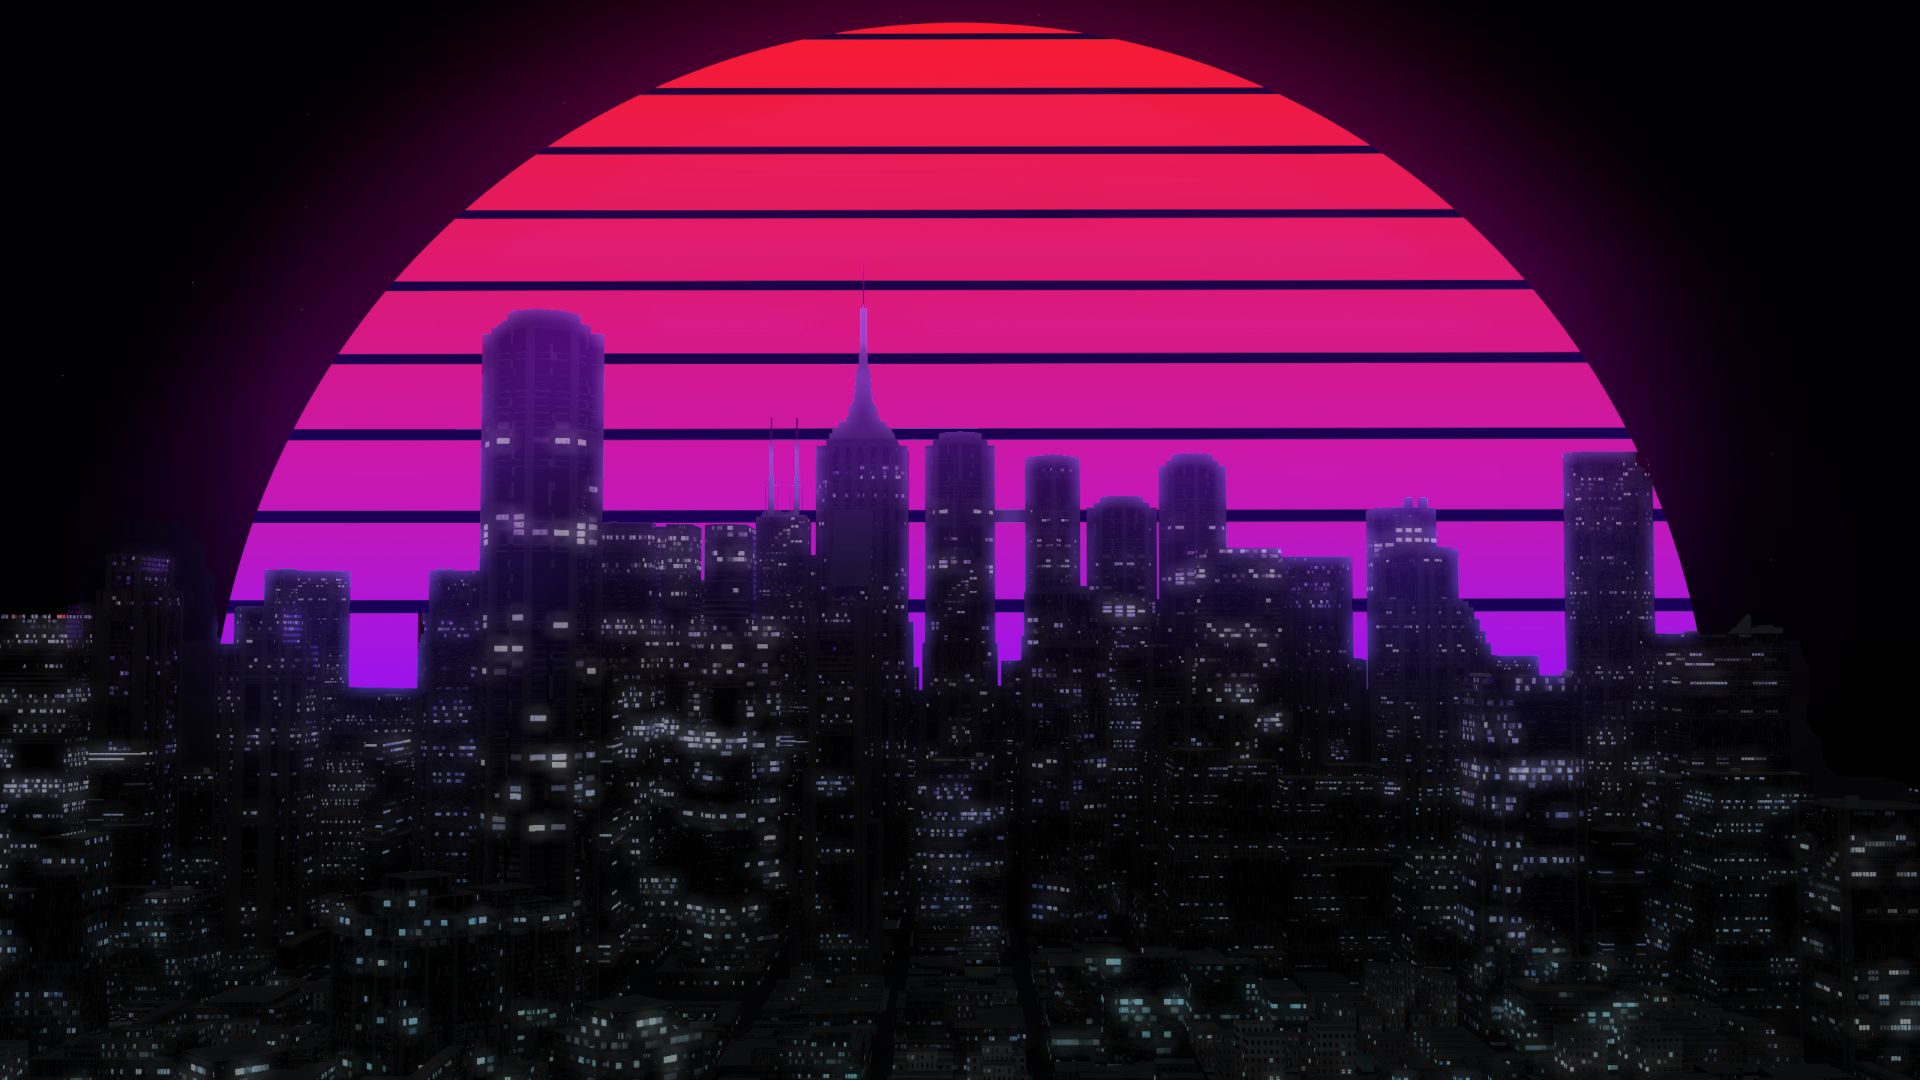 retro wave, artistic, city, synthwave wallpaper for mobile